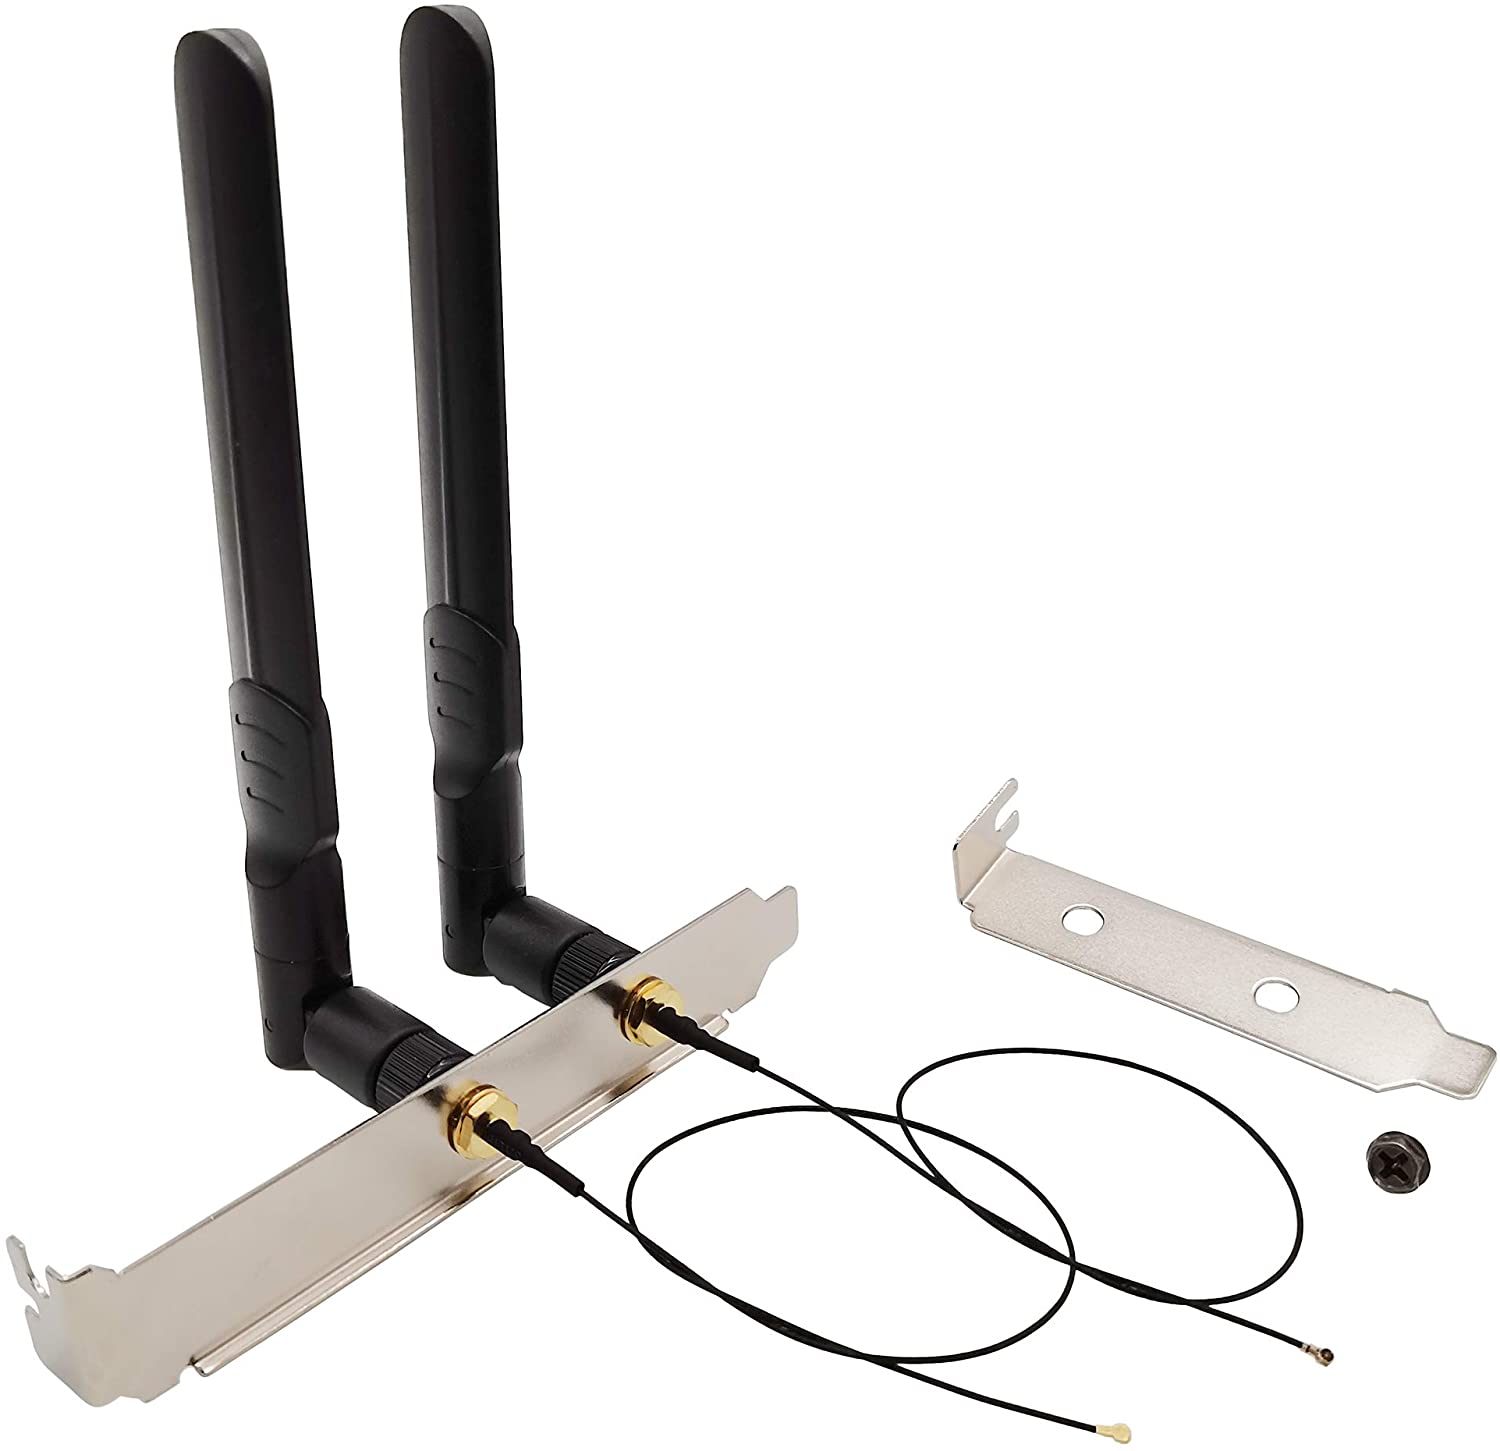 WiFi Antenna 8dBi RP-SMA Male 2.4Ghz 5.8Ghz Dual Band + 10in U.FL IPEX MHF4 to R